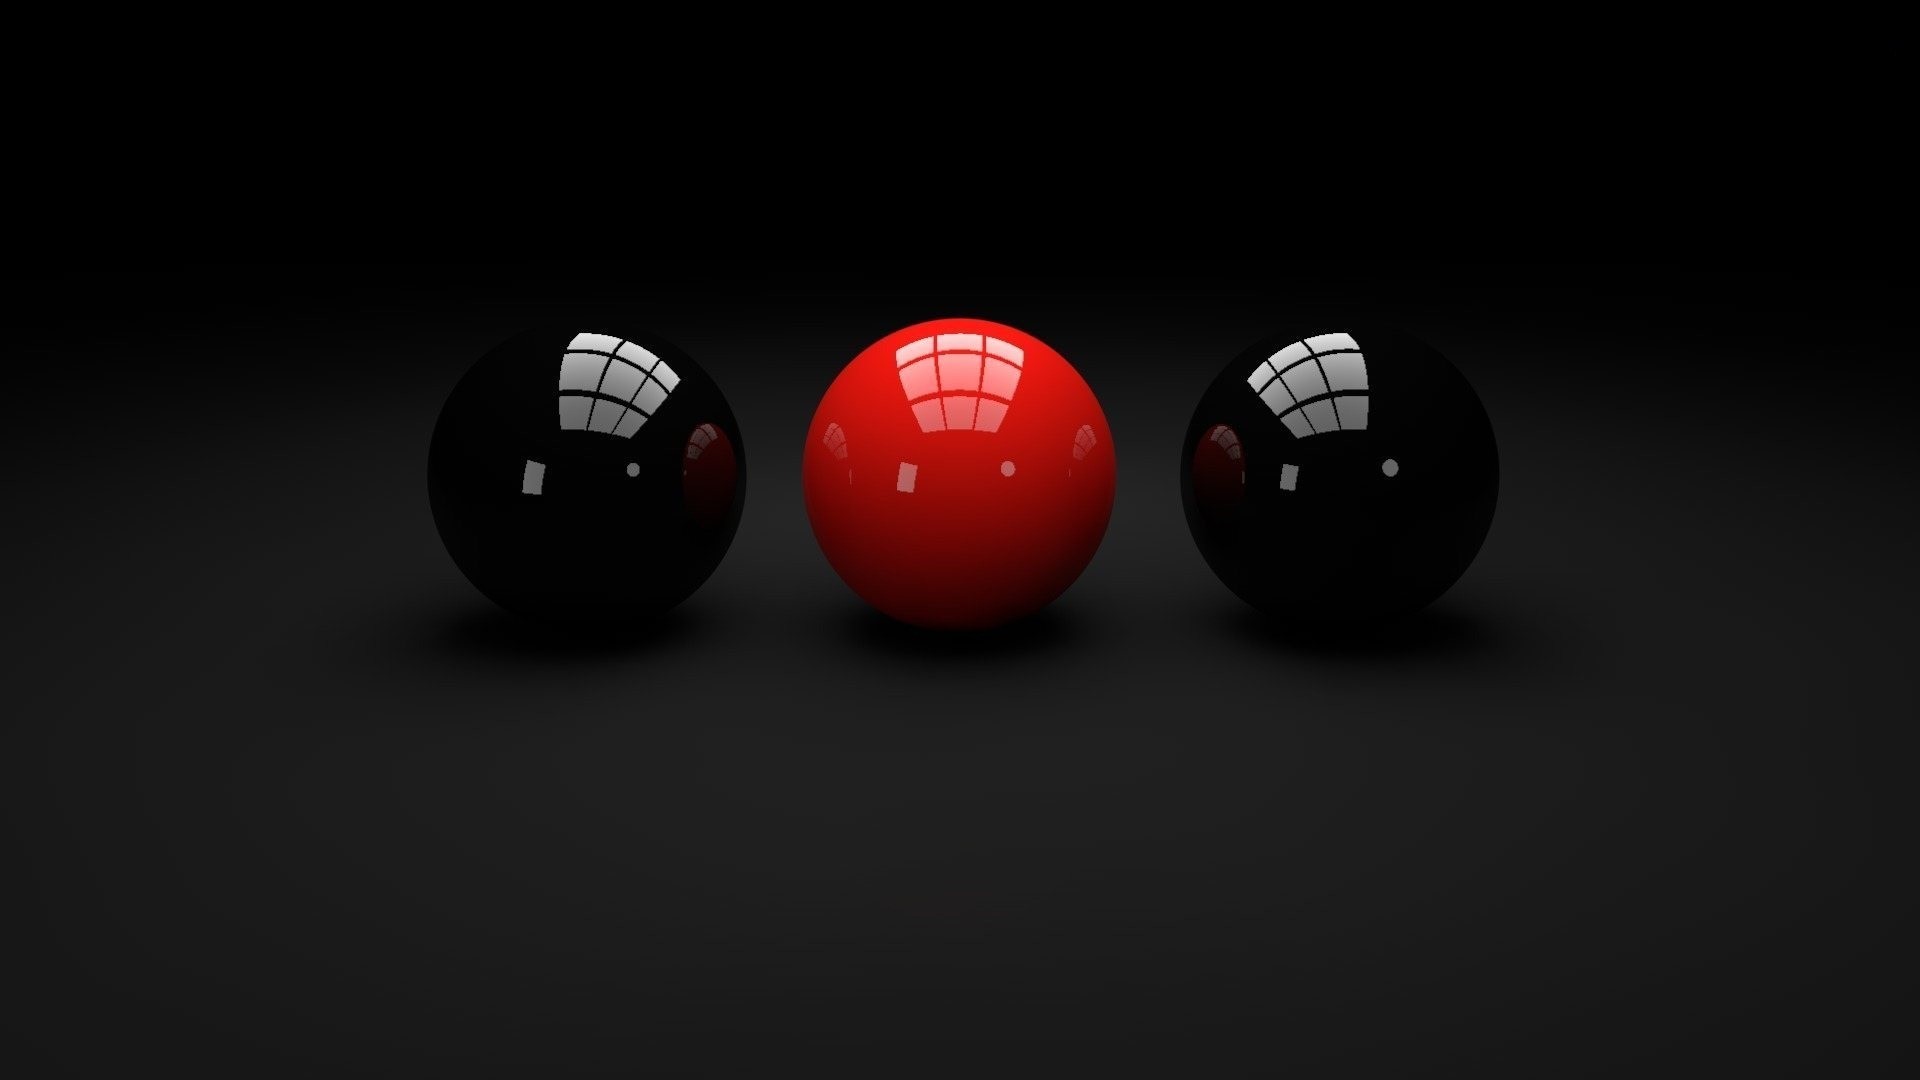 1920x1080 Snooker black and red balls: